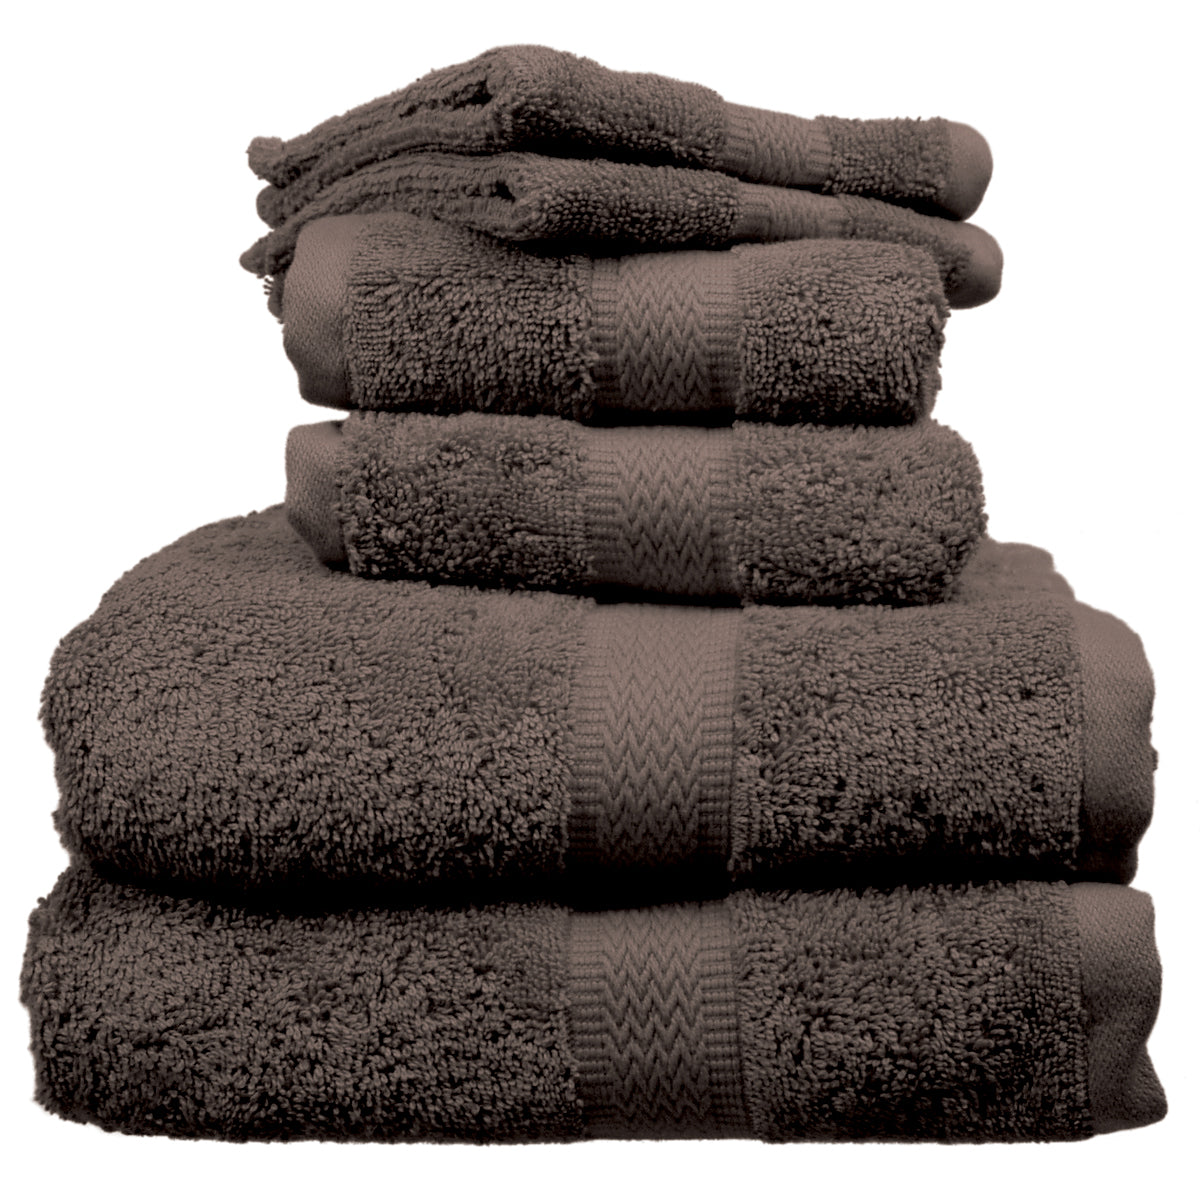 Euro Hotel Towel Collection, 100% Cotton